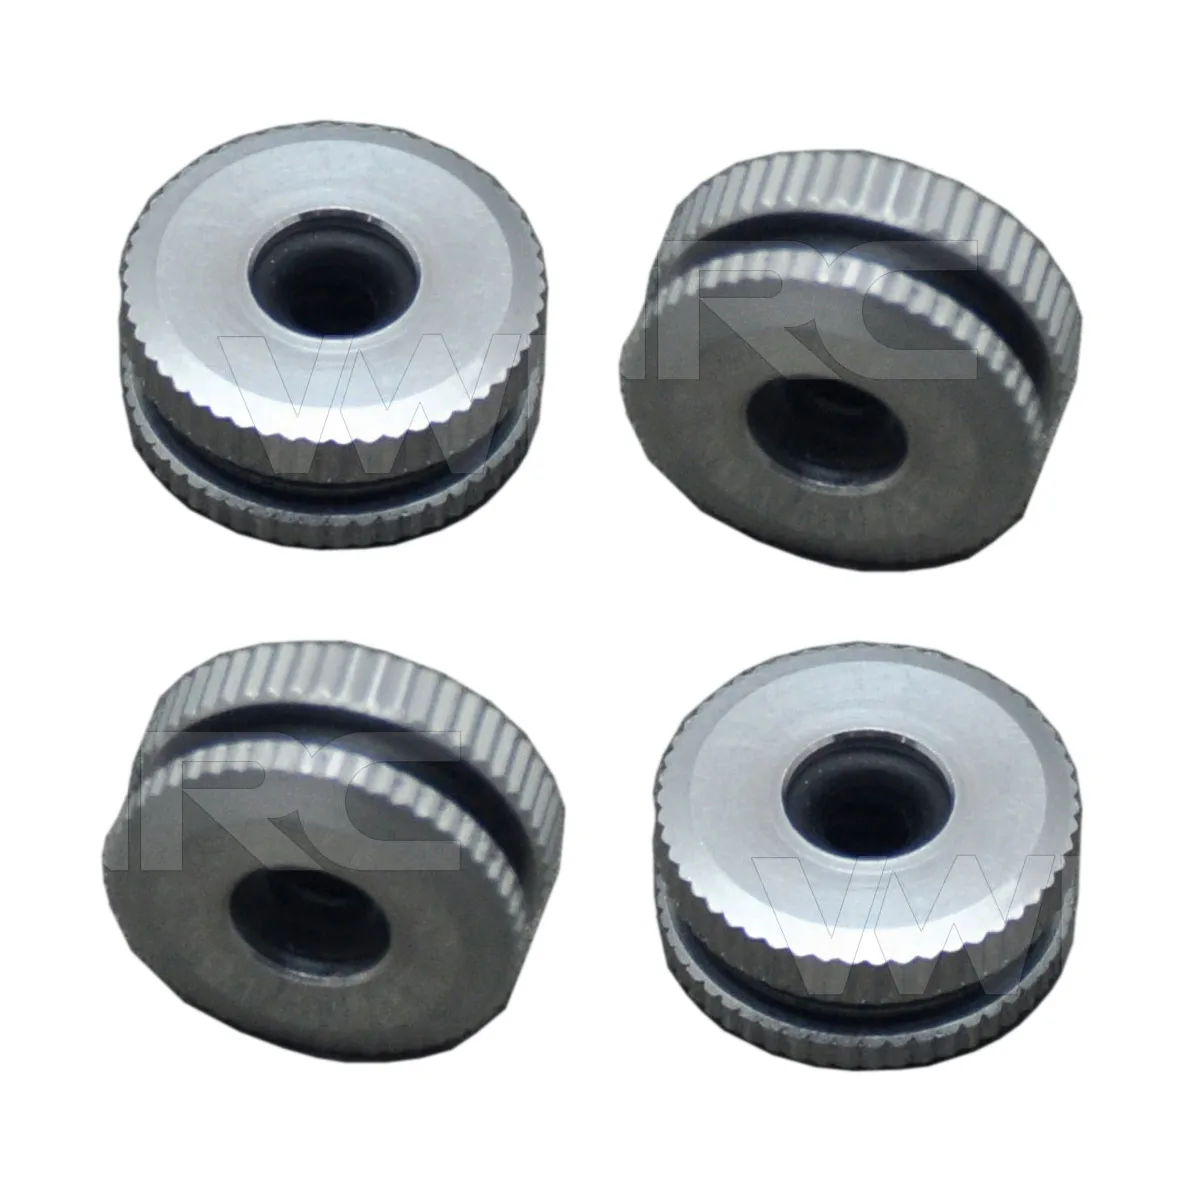 JHS1279W30 30 Pcs 450 Canopy Grommet Nuts for T-Rex 450 Helicopter White 